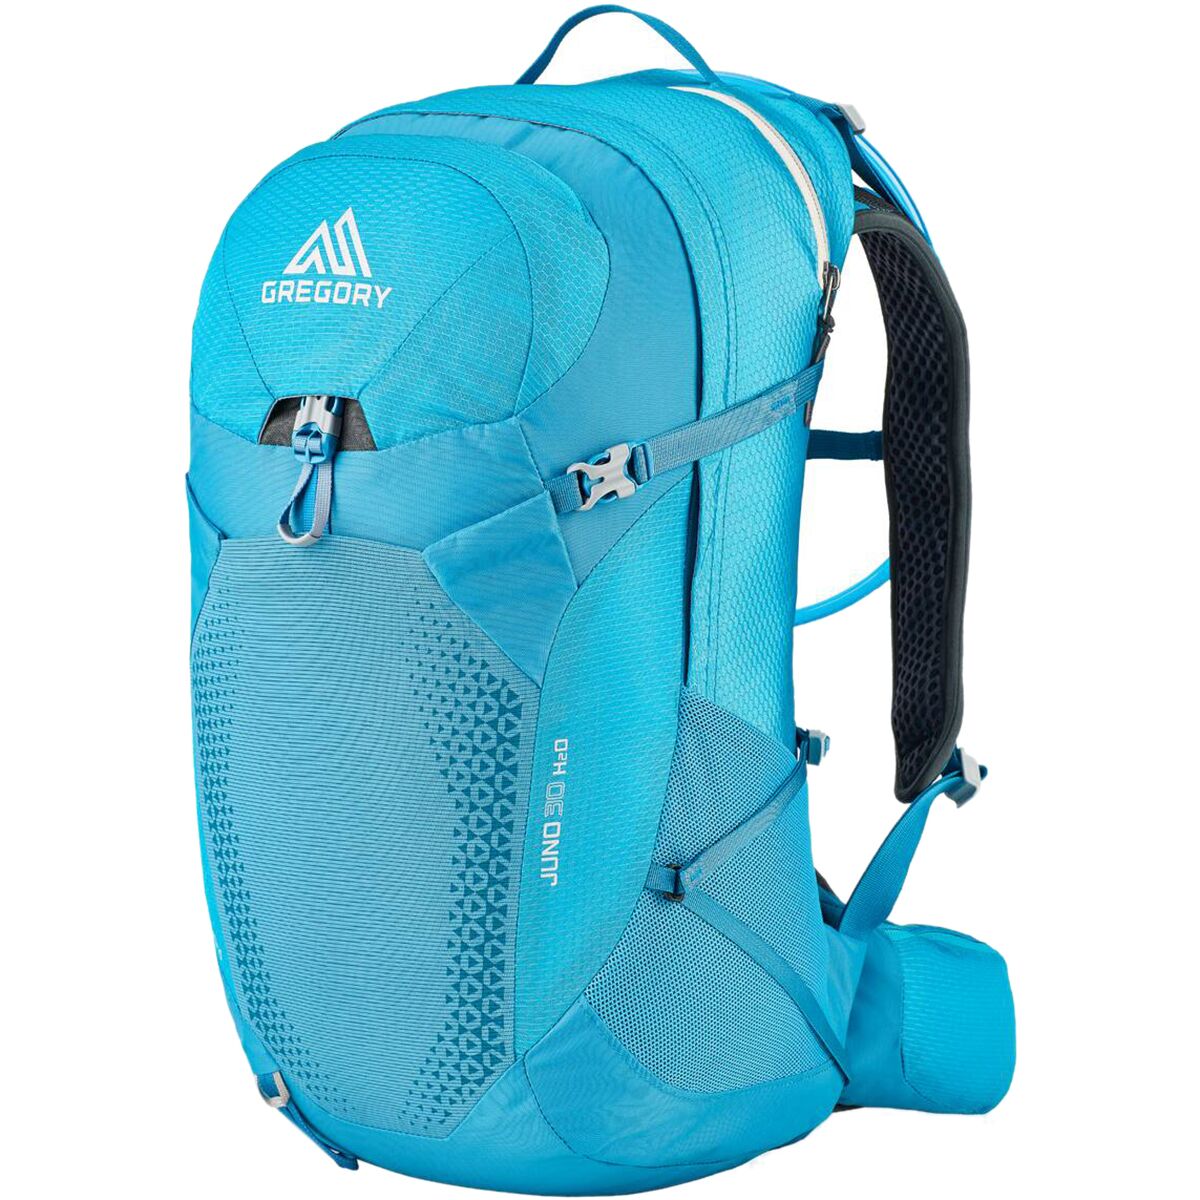 Gregory Juno H2O 30L Plus Backpack - Women's